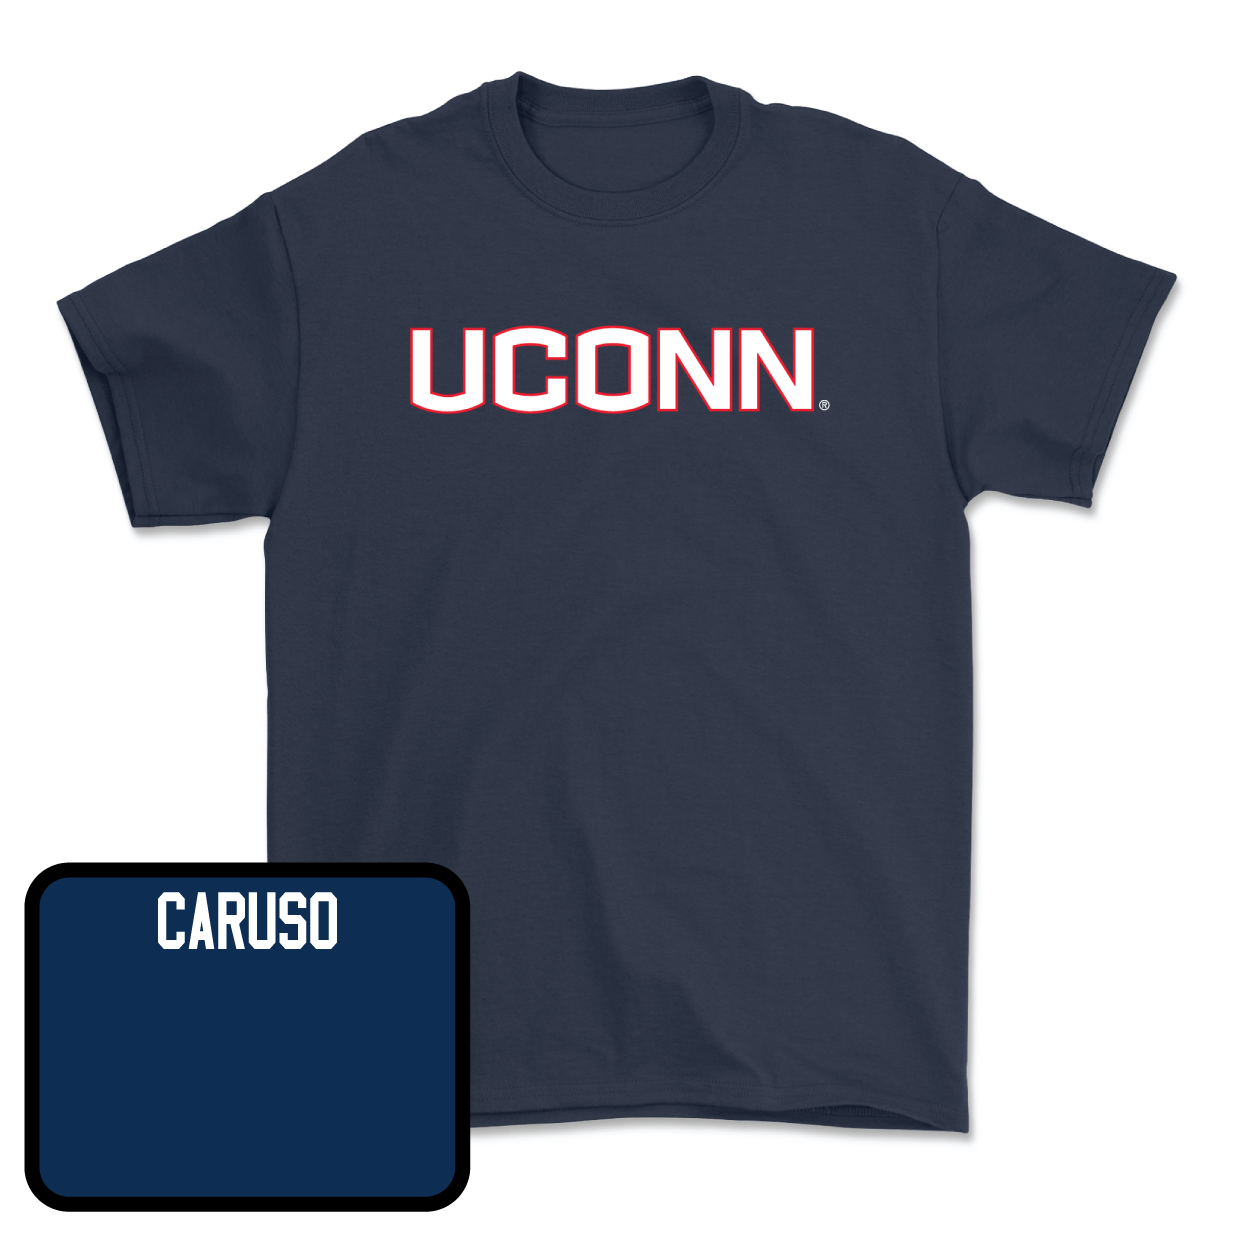 Navy Women's Rowing UConn Tee Small / Riley Caruso